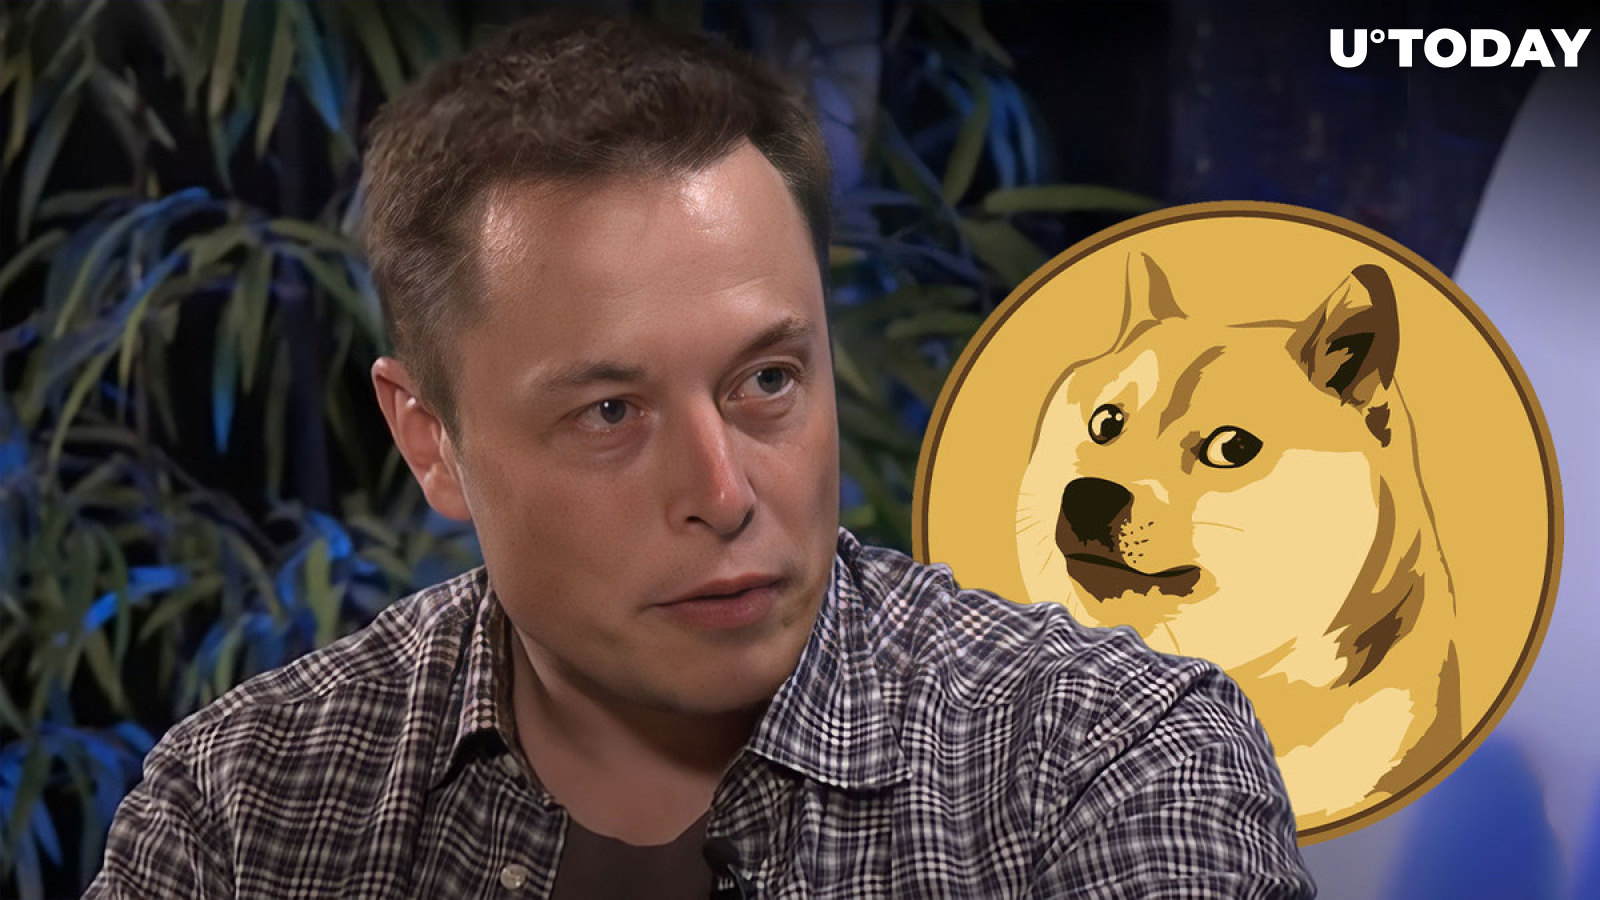 DOGE Creator Fails to Subscribe to Elon Musk on Twitter as $4.20 Subscription Fee Promised by Musk